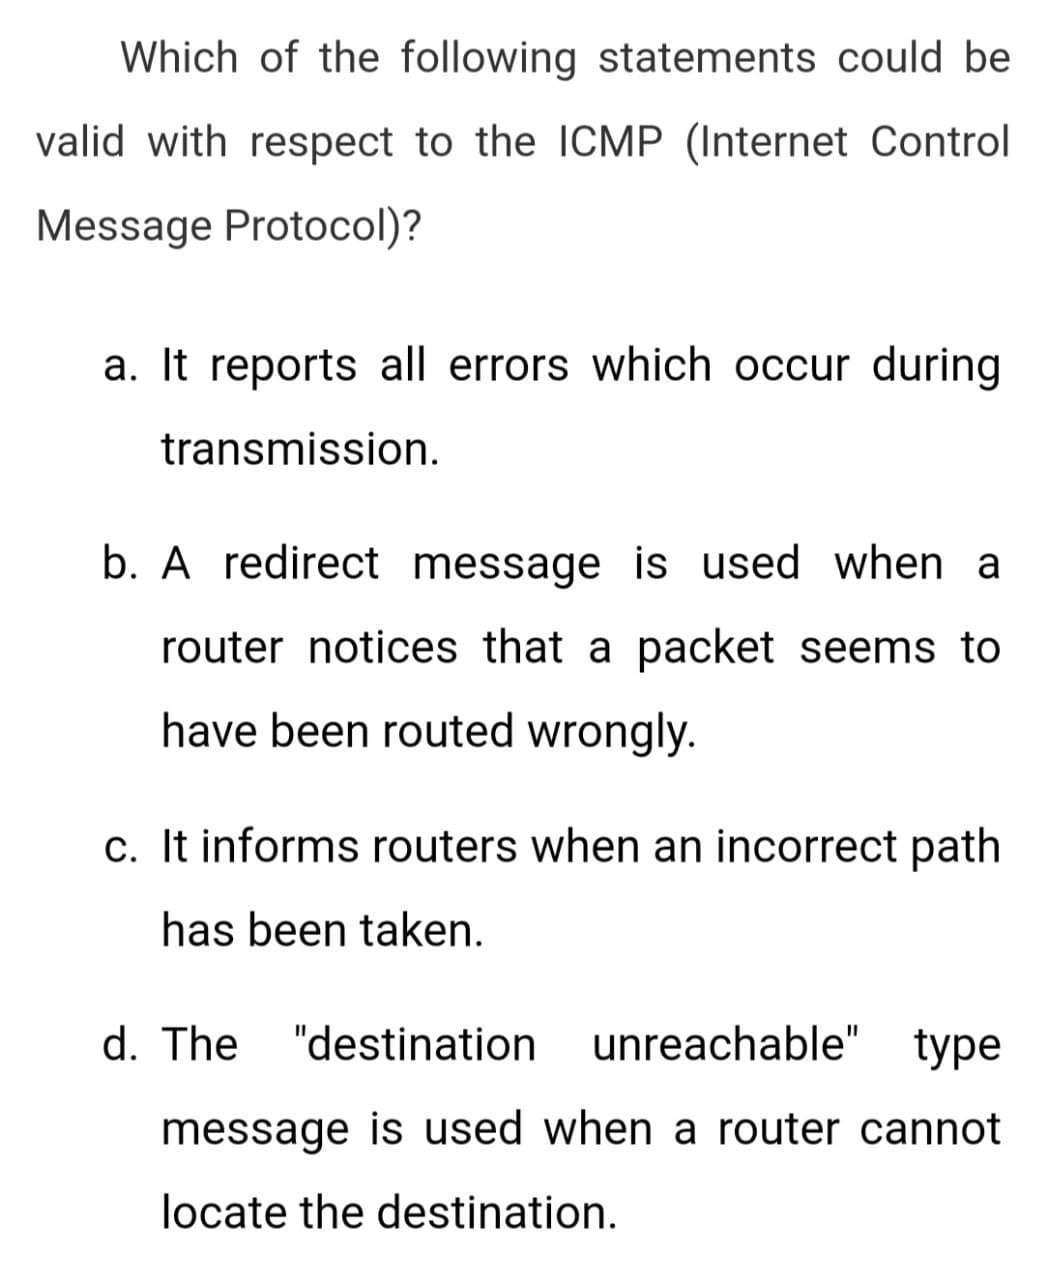 Which of the following statements could be
valid with respect to the ICMP (Internet Control
Message Protocol)?
a. It reports all errors which occur during
transmission.
b. A redirect message is used when a
router notices that a packet seems to
have been routed wrongly.
c. It informs routers when an incorrect path
has been taken.
d. The "destination unreachable" type
message is used when a router cannot
locate the destination.